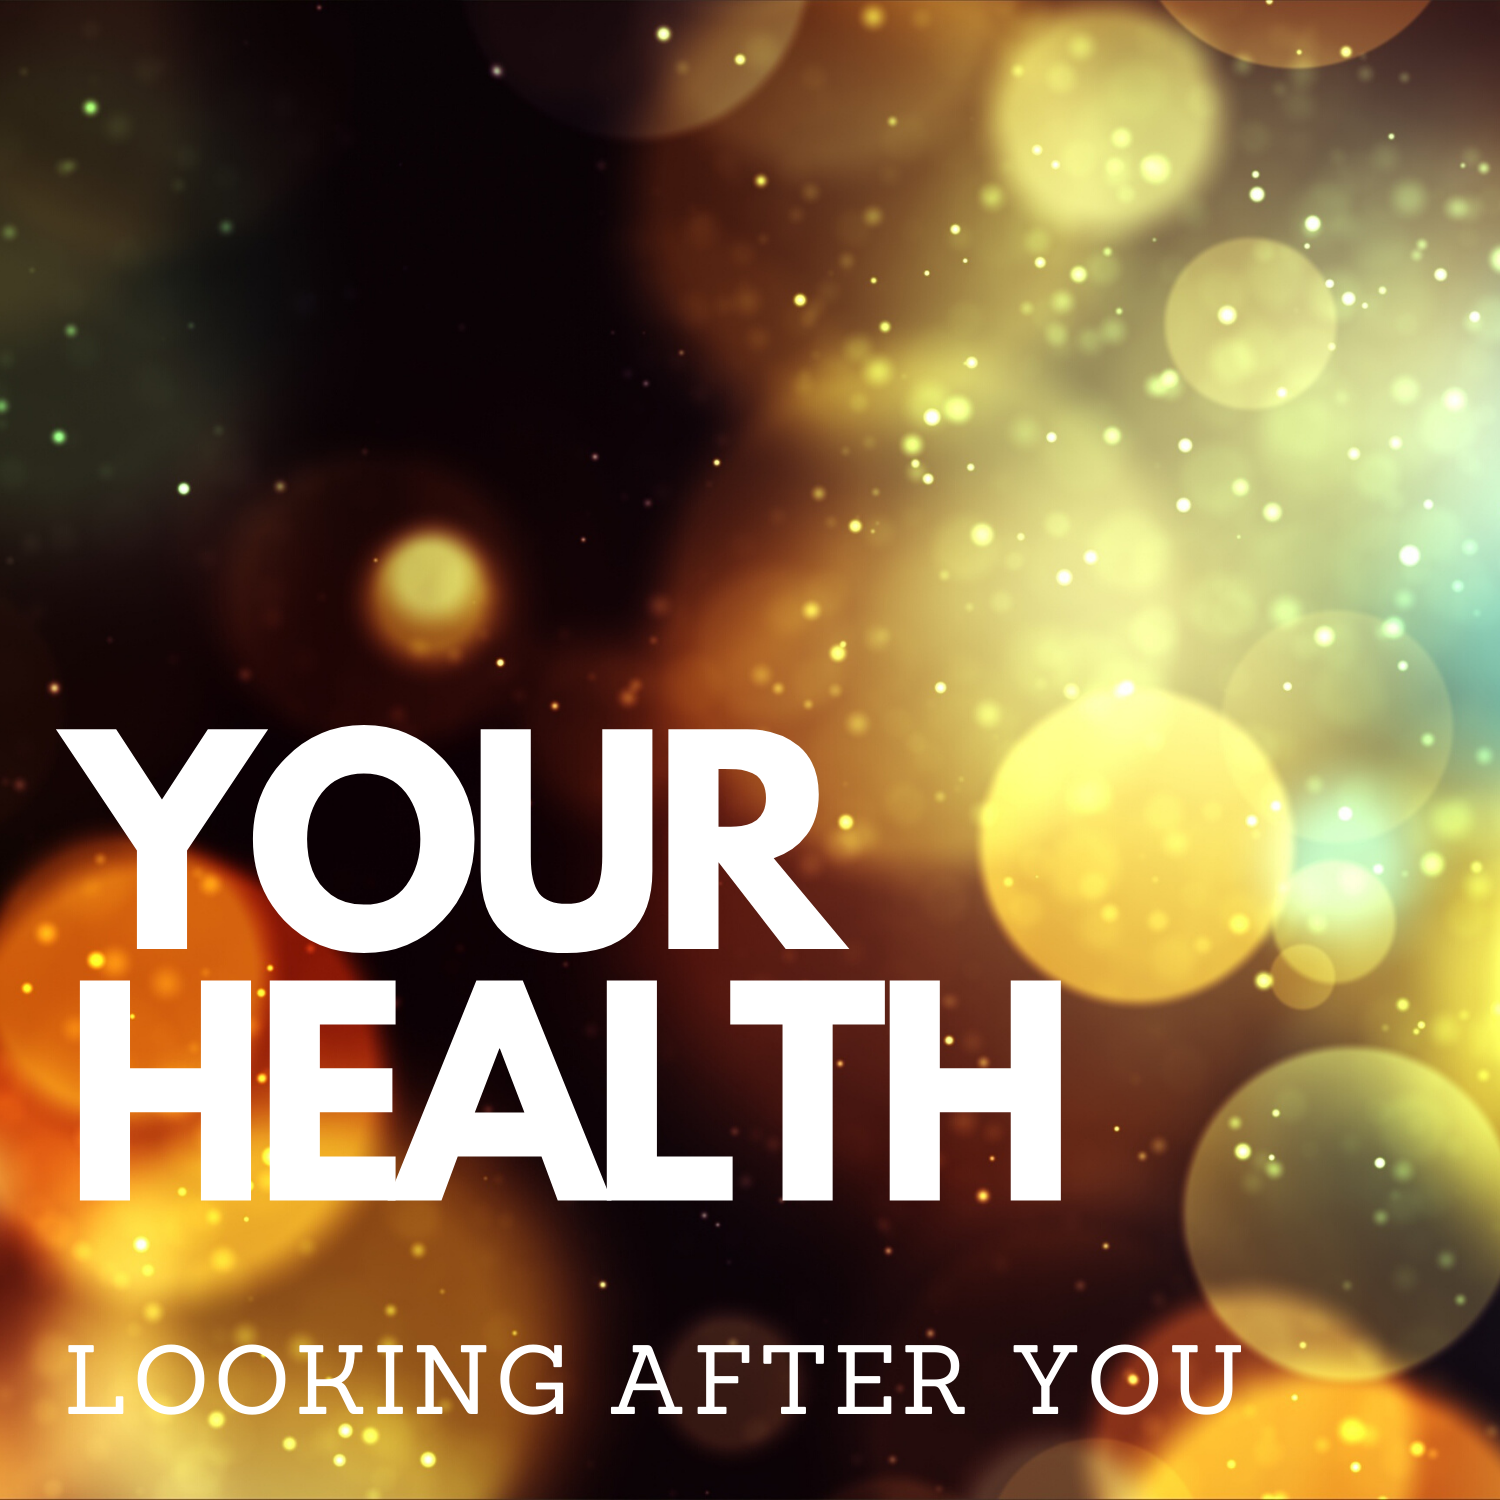 Your health